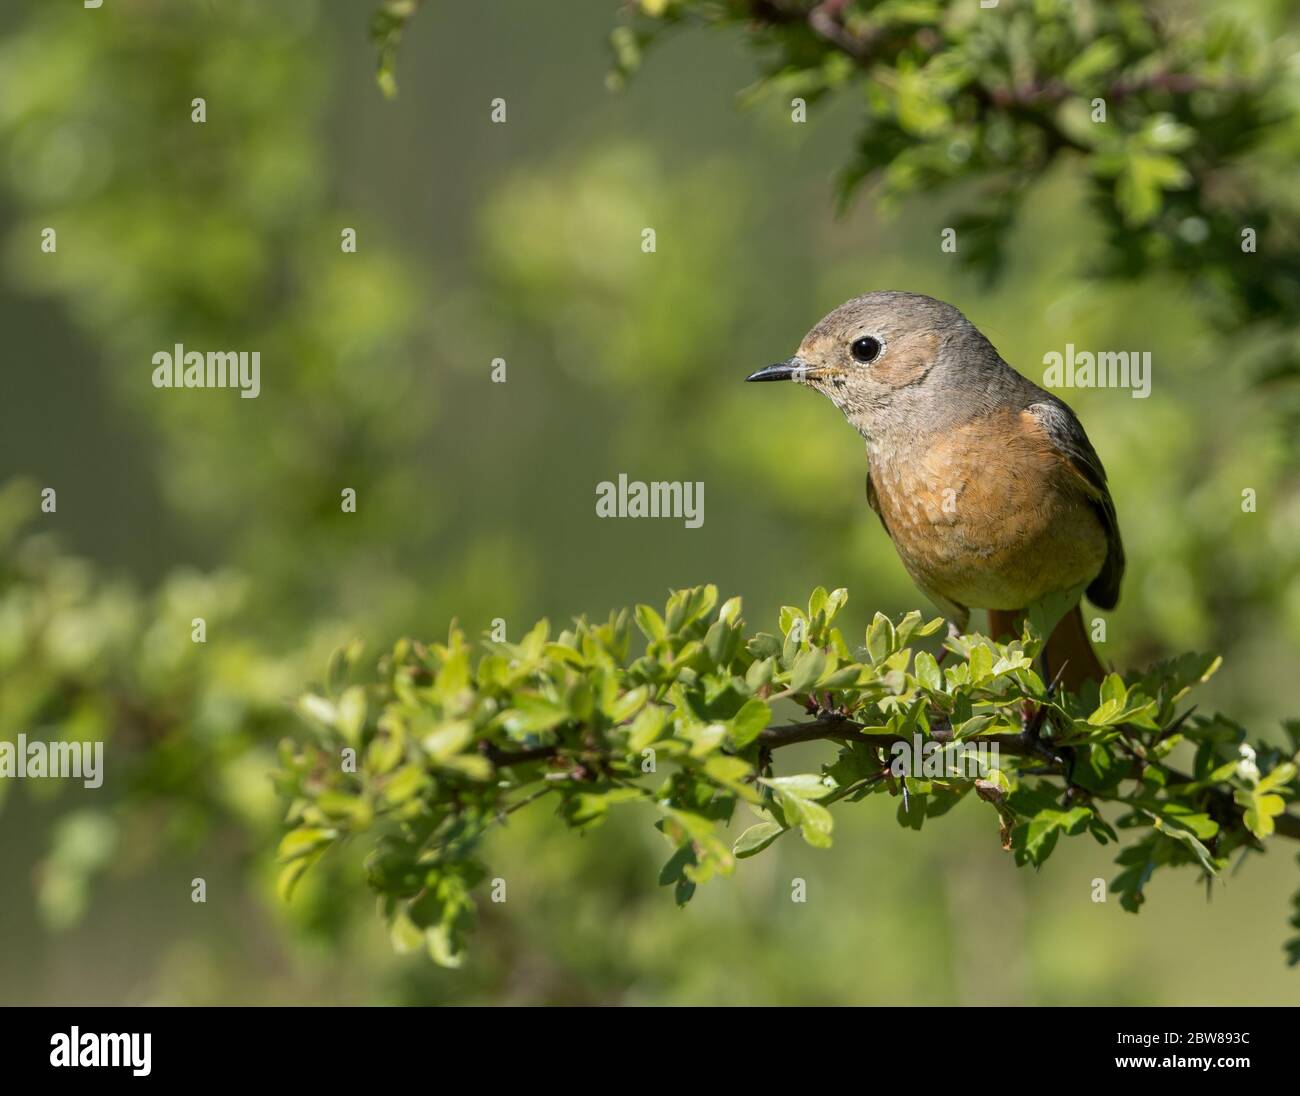 A female Common Redstart (Phoenicurus phoenicurus) in breeding plumage perched in front a clean background. Taken on Cleeve Hill, Gloucestershire, UK. Stock Photo